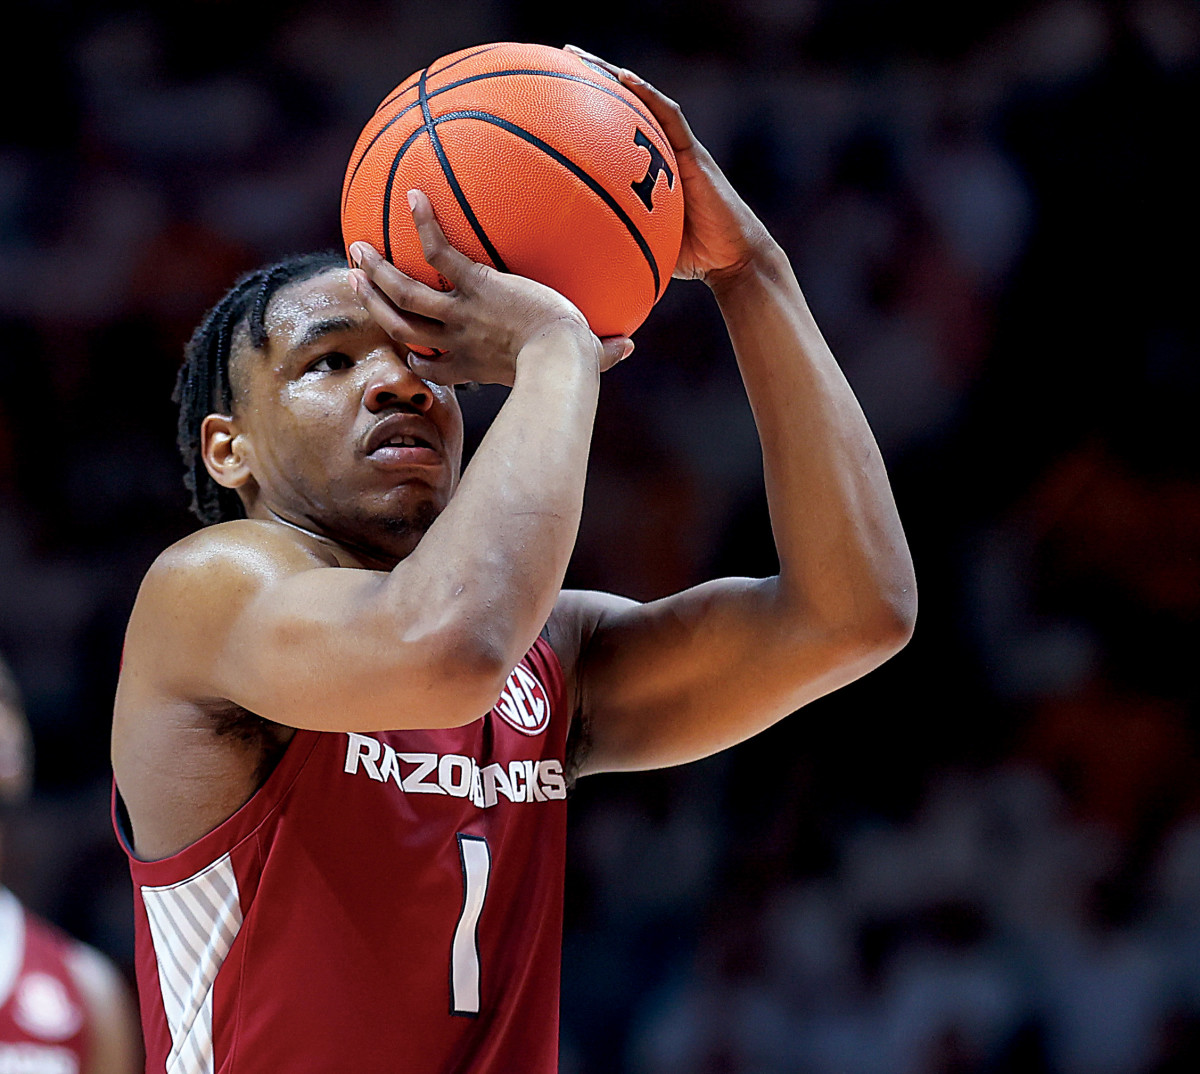 Arkansas Razorbacks guard JD Notae (1) shoots a free throw during the second half against the Tennessee Volunteers at Thompson-Boling Arena.